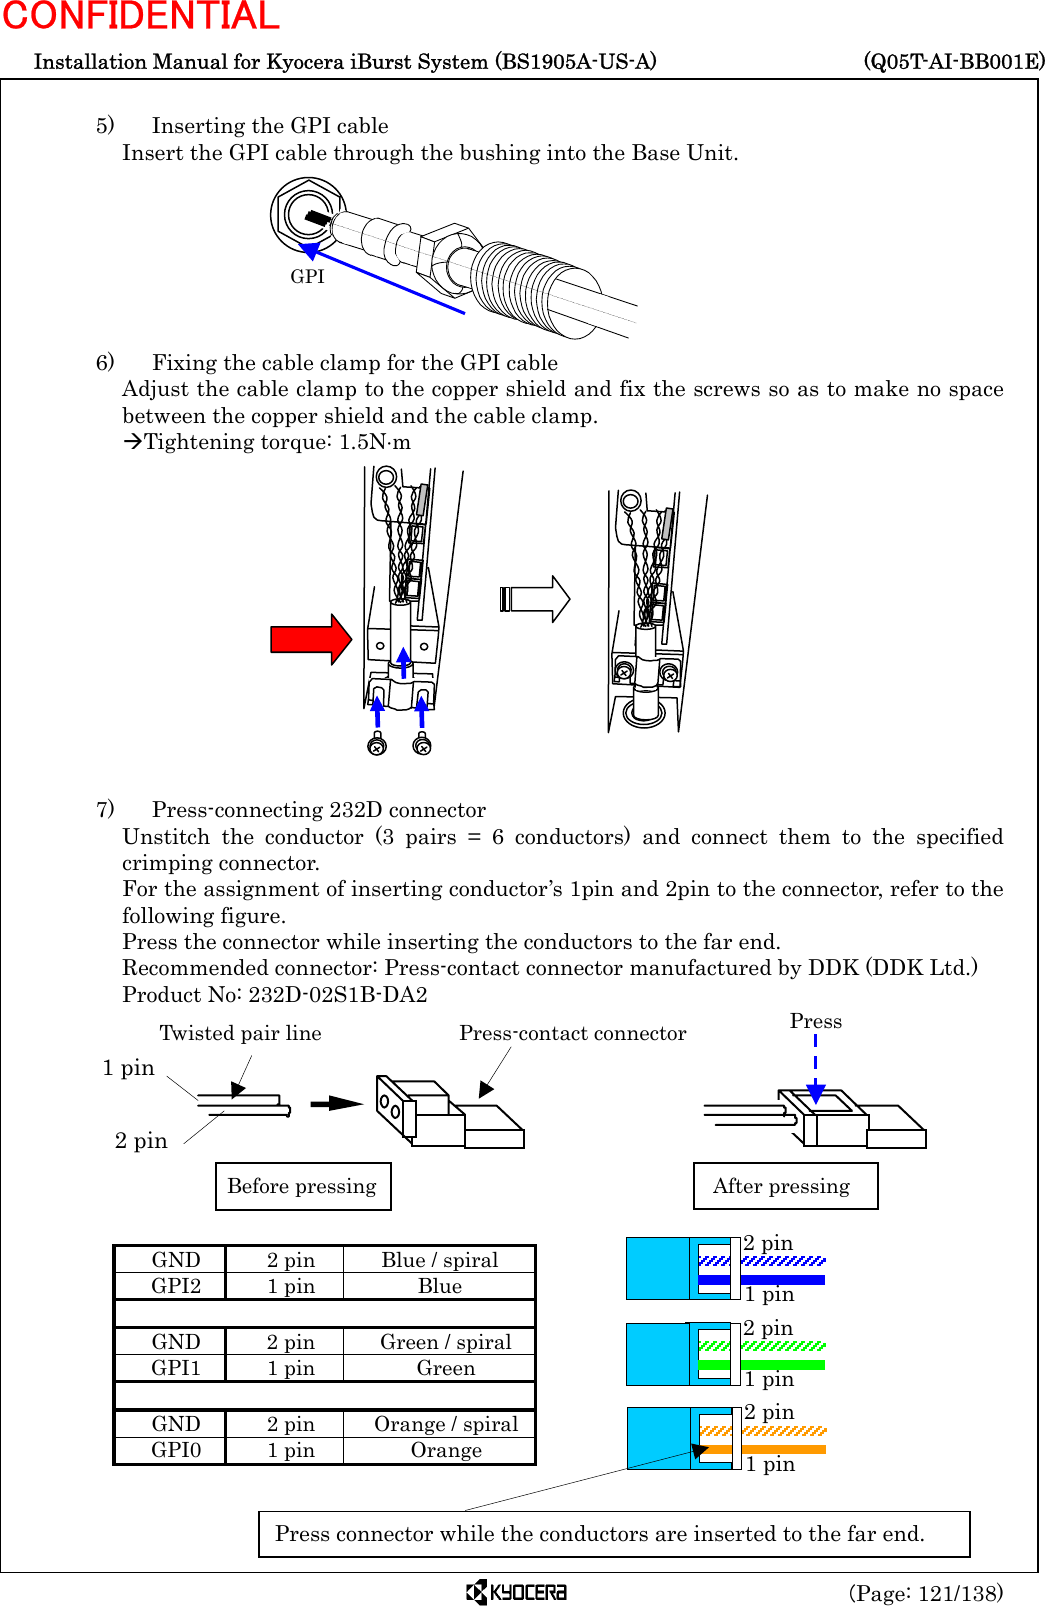  Installation Manual for Kyocera iBurst System (BS1905A-US-A)     (Q05T-AI-BB001E) (Page: 121/138) CONFIDENTIAL  5)    Inserting the GPI cable Insert the GPI cable through the bushing into the Base Unit.        6)    Fixing the cable clamp for the GPI cable Adjust the cable clamp to the copper shield and fix the screws so as to make no space between the copper shield and the cable clamp. ÆTightening torque: 1.5N⋅m              7)    Press-connecting 232D connector Unstitch the conductor (3 pairs = 6 conductors) and connect them to the specified crimping connector. For the assignment of inserting conductor’s 1pin and 2pin to the connector, refer to the following figure. Press the connector while inserting the conductors to the far end. Recommended connector: Press-contact connector manufactured by DDK (DDK Ltd.) Product No: 232D-02S1B-DA2          GND  2 pin  Blue / spiral GPI2 1 pin  Blue     GND  2 pin  Green / spiral GPI1 1 pin  Green     GND  2 pin  Orange / spiral GPI0 1 pin  Orange  GPI Twisted pair line Press-contact connector2 pin1 pinBefore pressing After pressingPressPress connector while the conductors are inserted to the far end. 2 pin 1 pin 2 pin 1 pin 2 pin 1 pin 